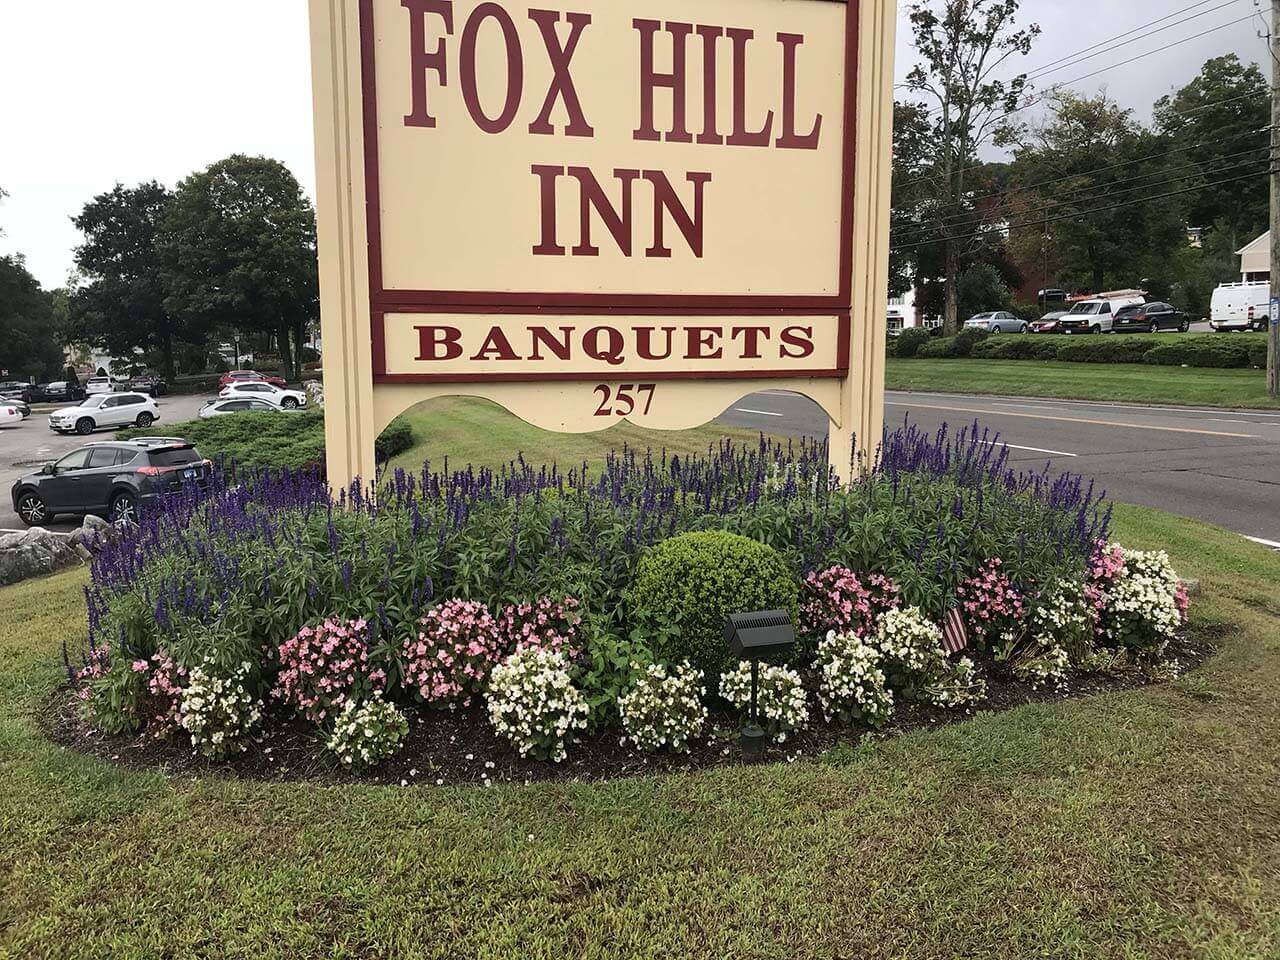 Fox Hill Inn Banquets with shrubs and flower landscaping